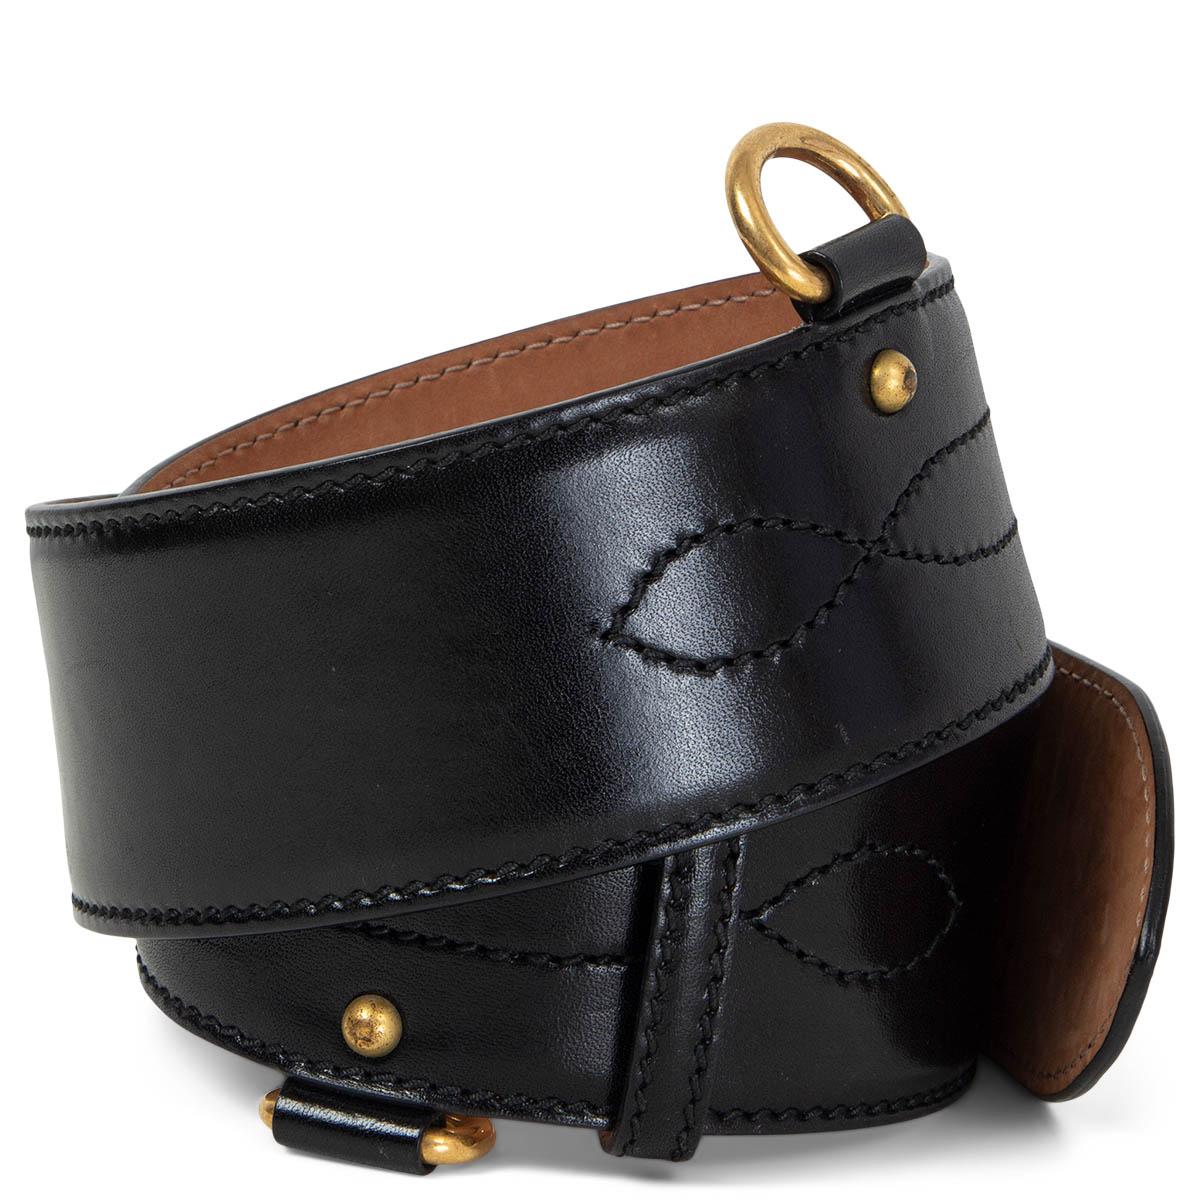 100% authentic Alexander McQueen waist belt in black leather with gold-tone hardware and decorative tonal top stitching. Has been worn and is in excellent condition. 

Measurements
Tag Size	75
Size	75cm (29.3in)
Width	5.5cm (2.1in)
Fits	68cm